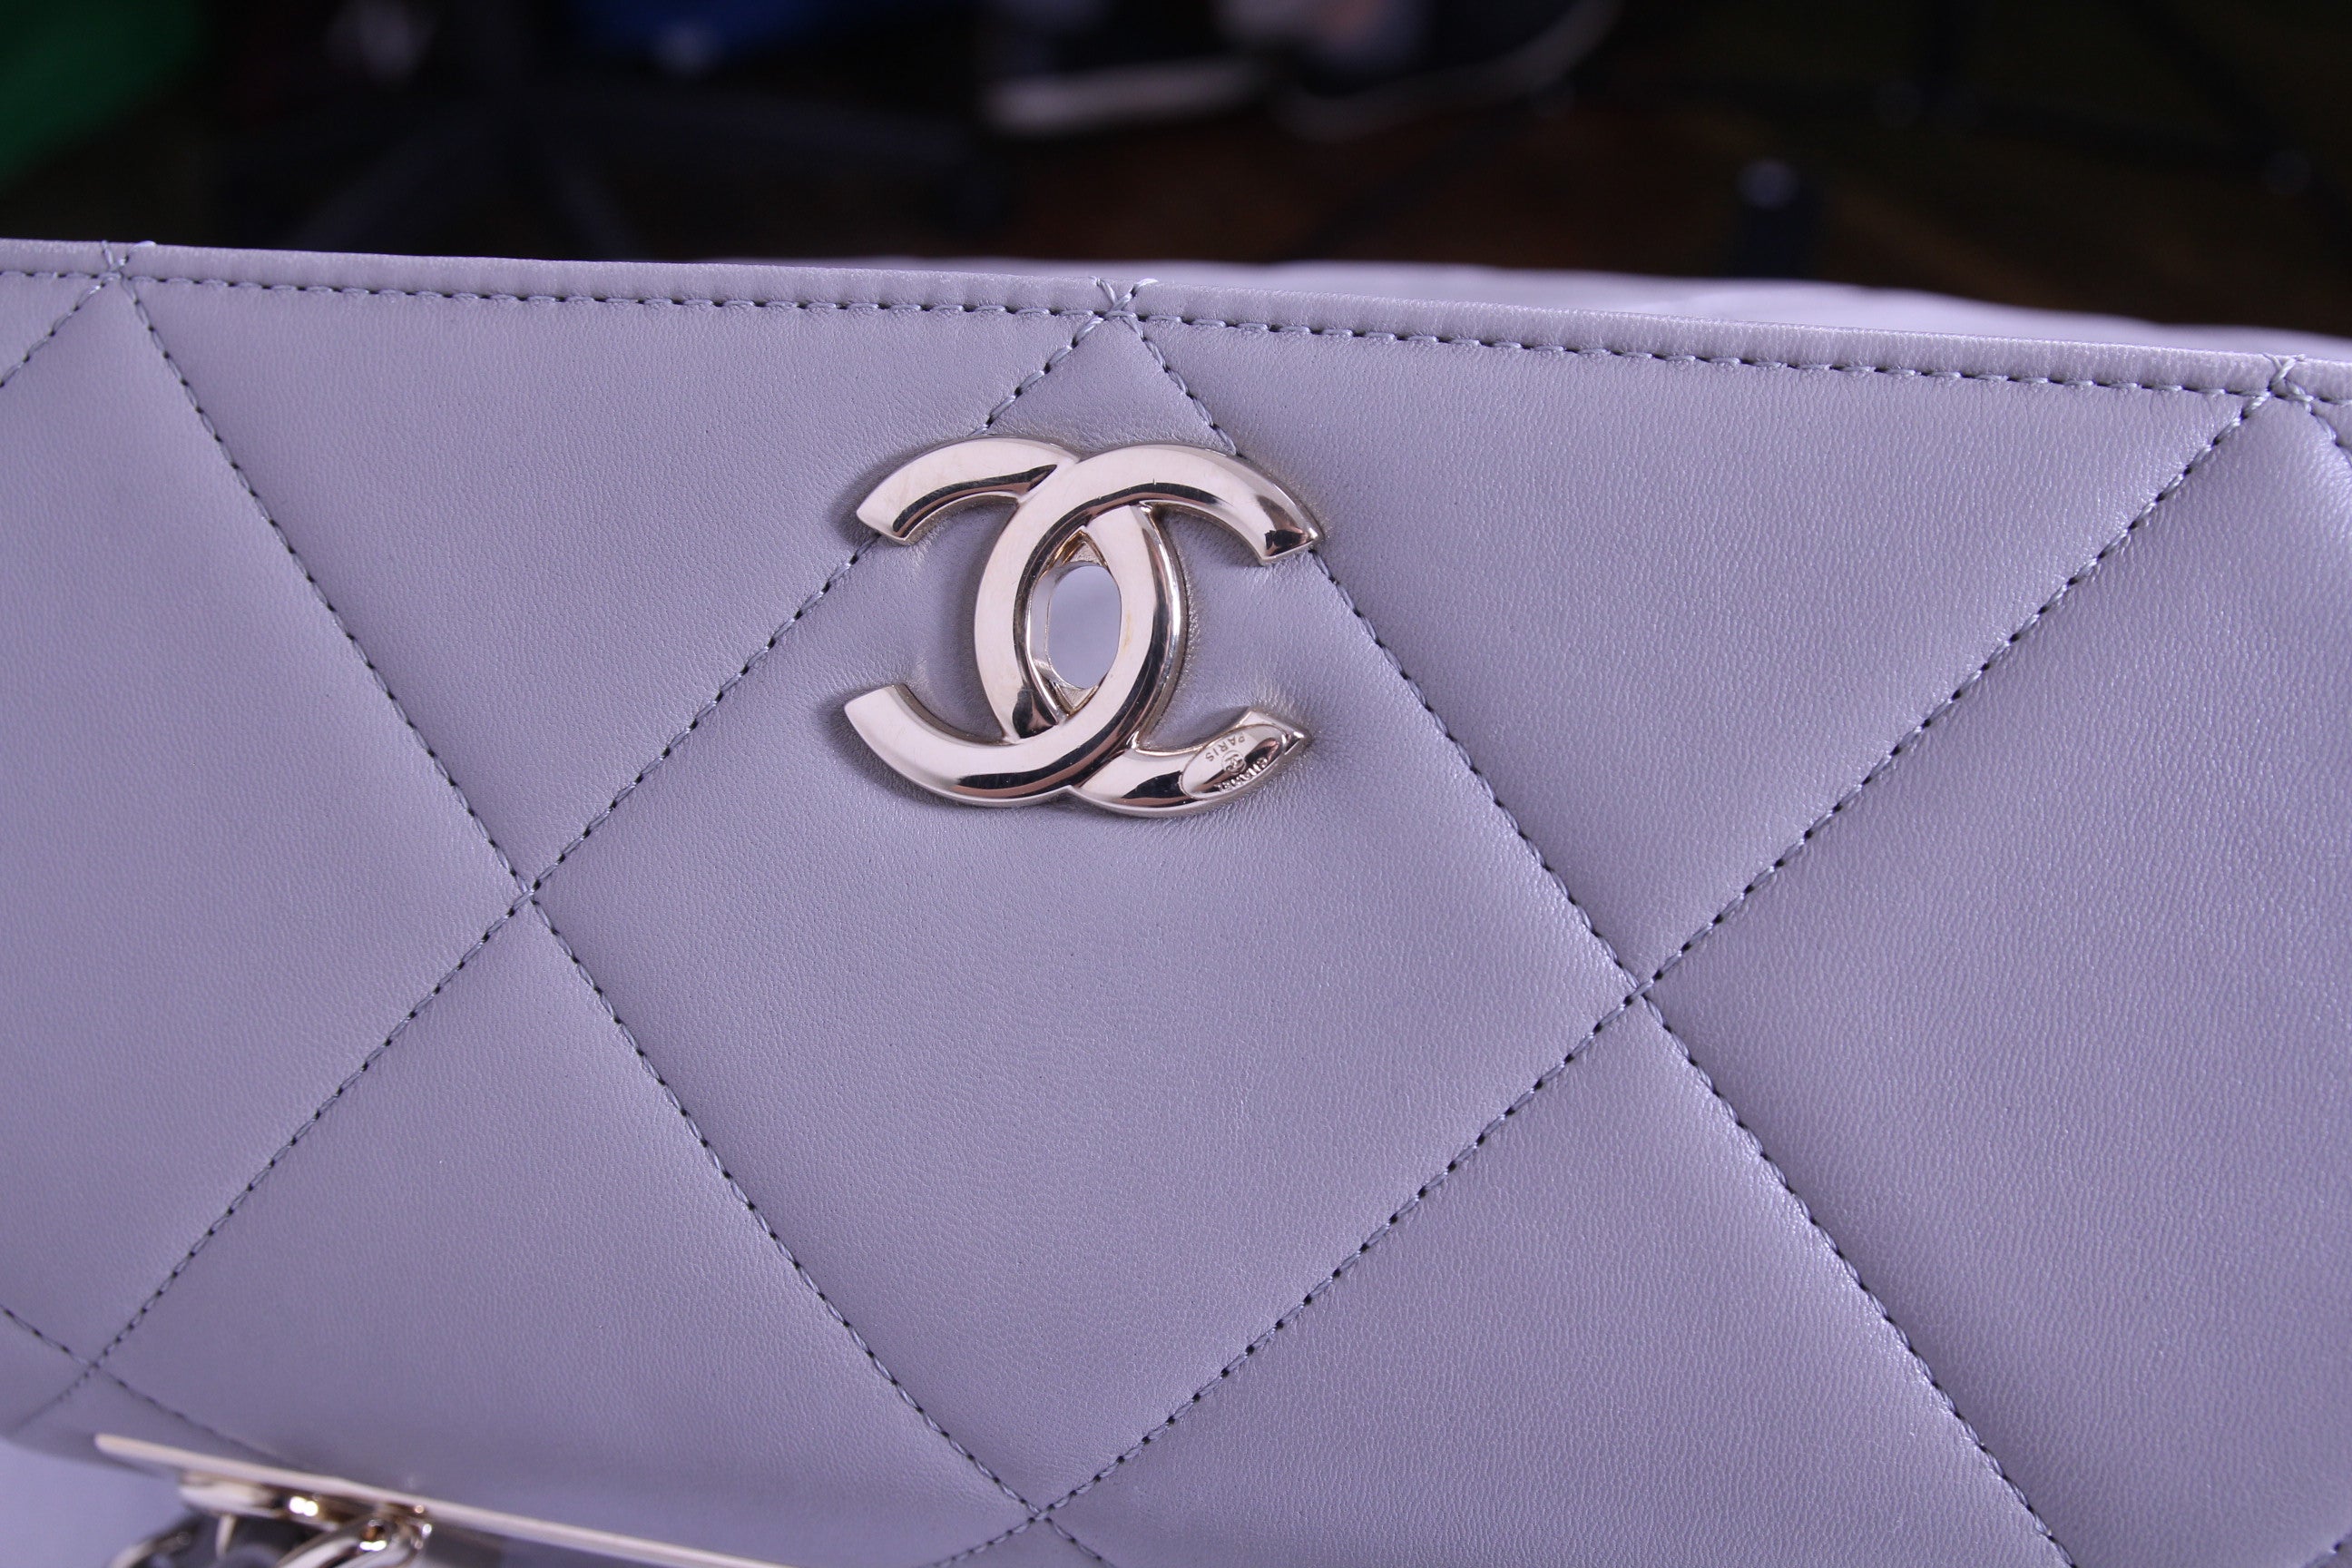 Hardware of Chanel trendy cc finished in grey lambskin